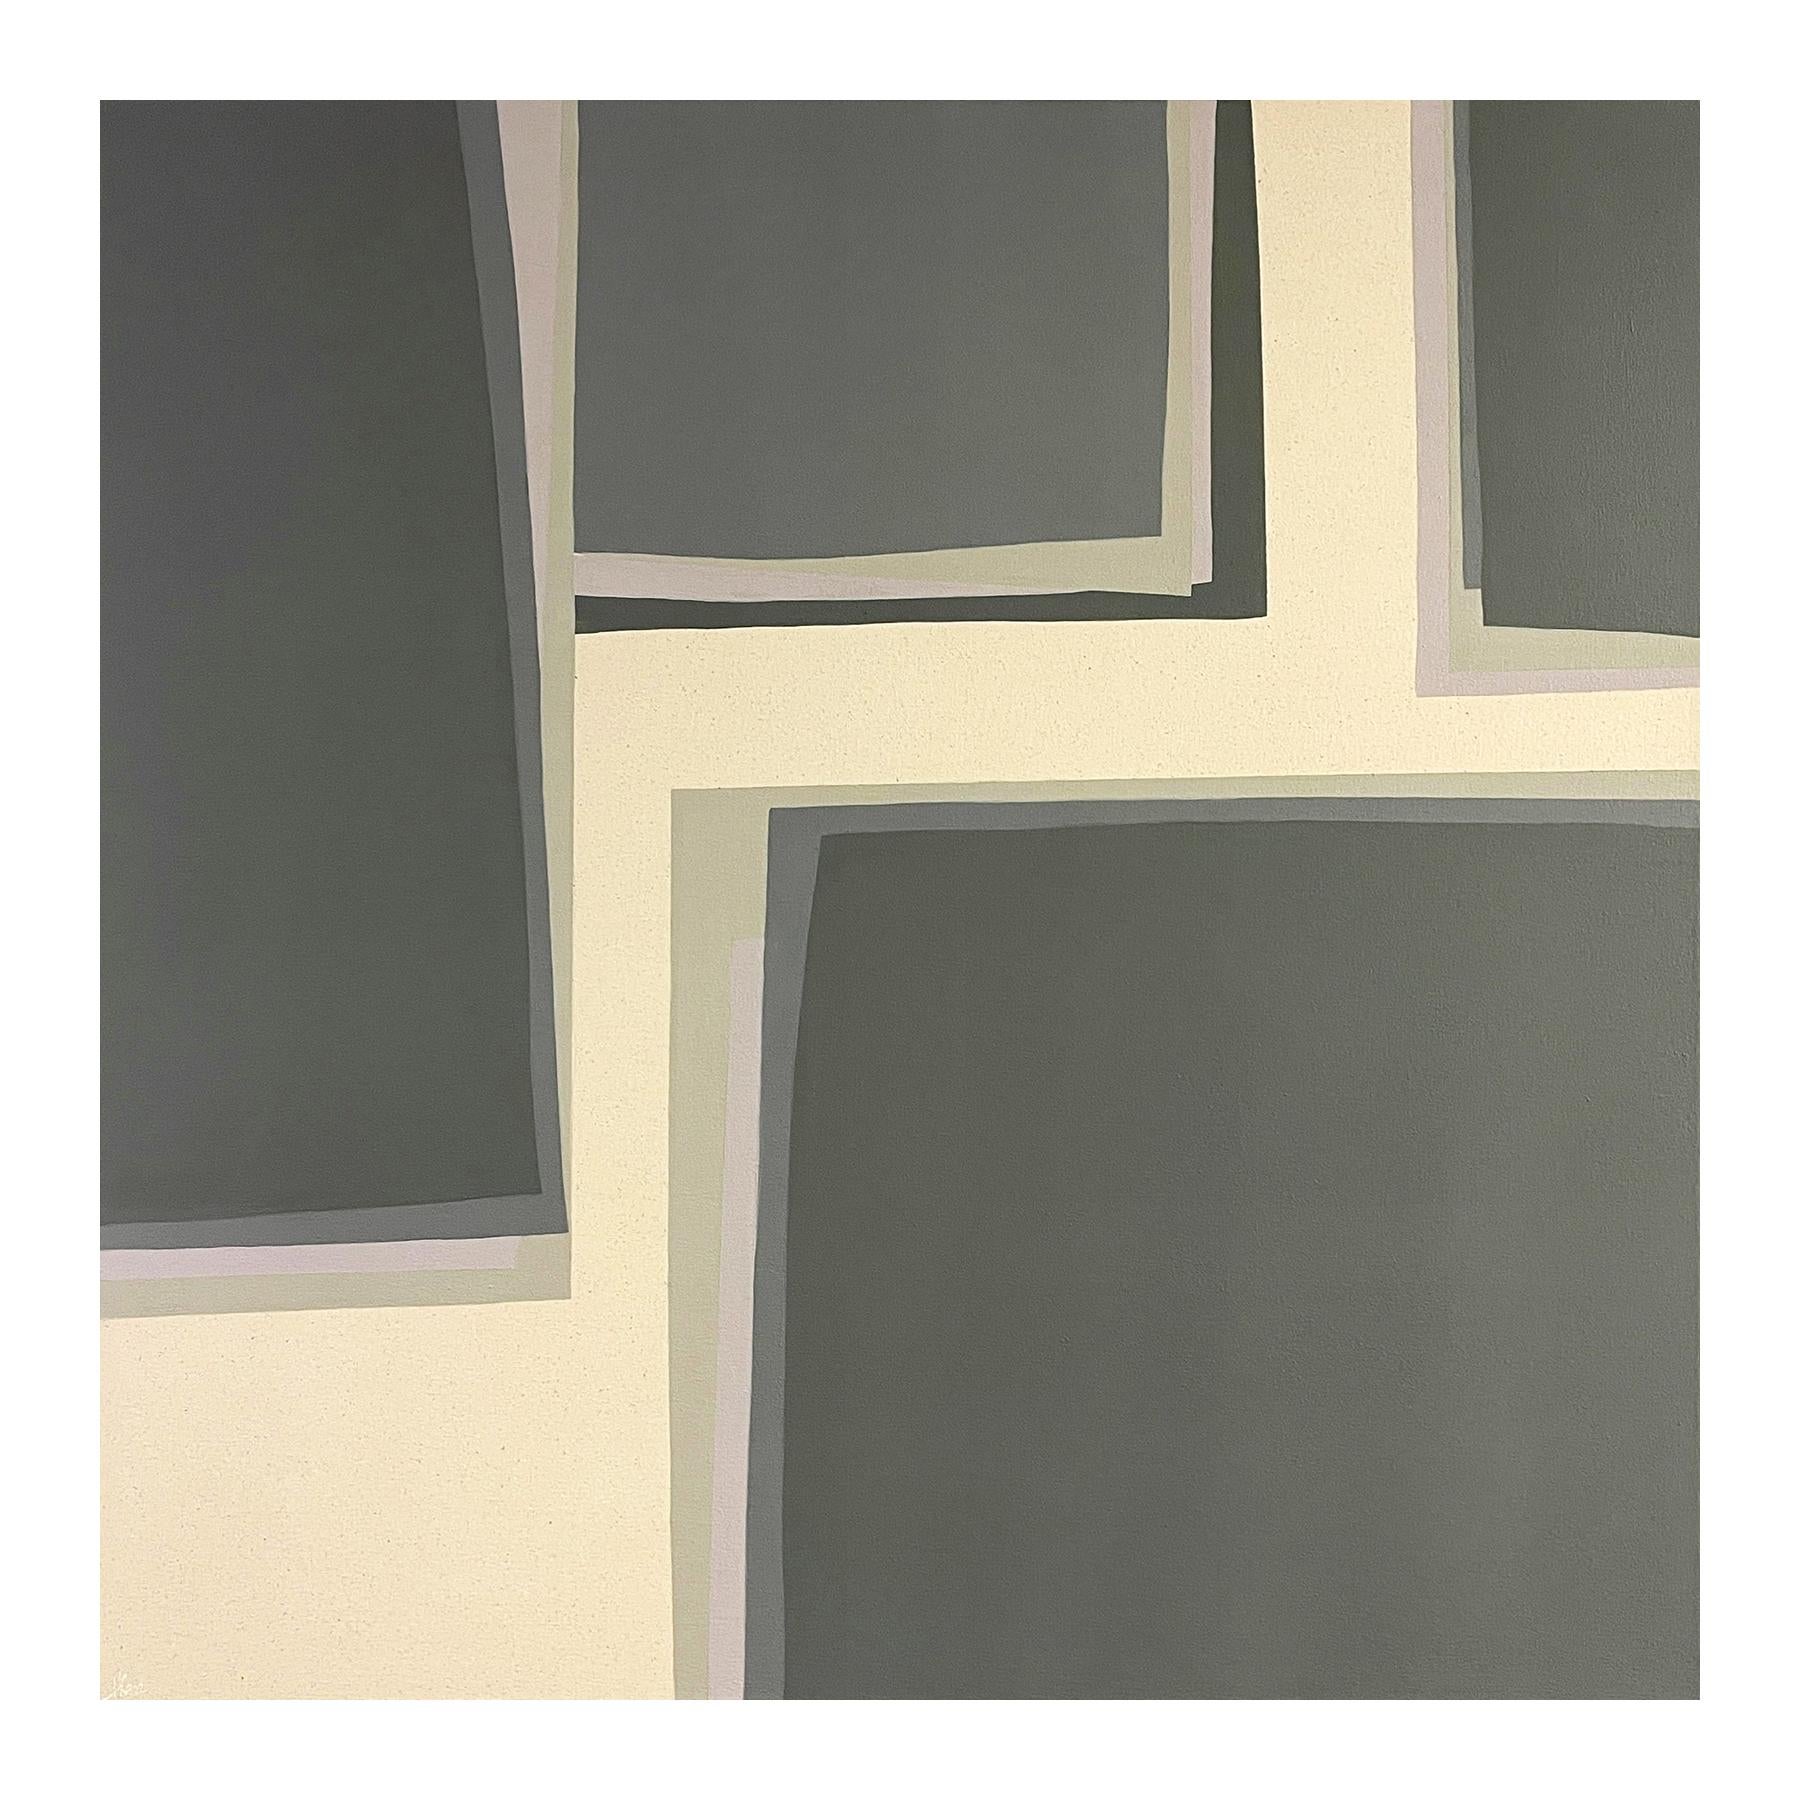 Contemporary abstract geometric painting by Houston-based artist Holland Geibel. The work features layers of rectangular shapes in various tones of grey set against a tan background. Signed and titled on the reverse. Recently featured in 